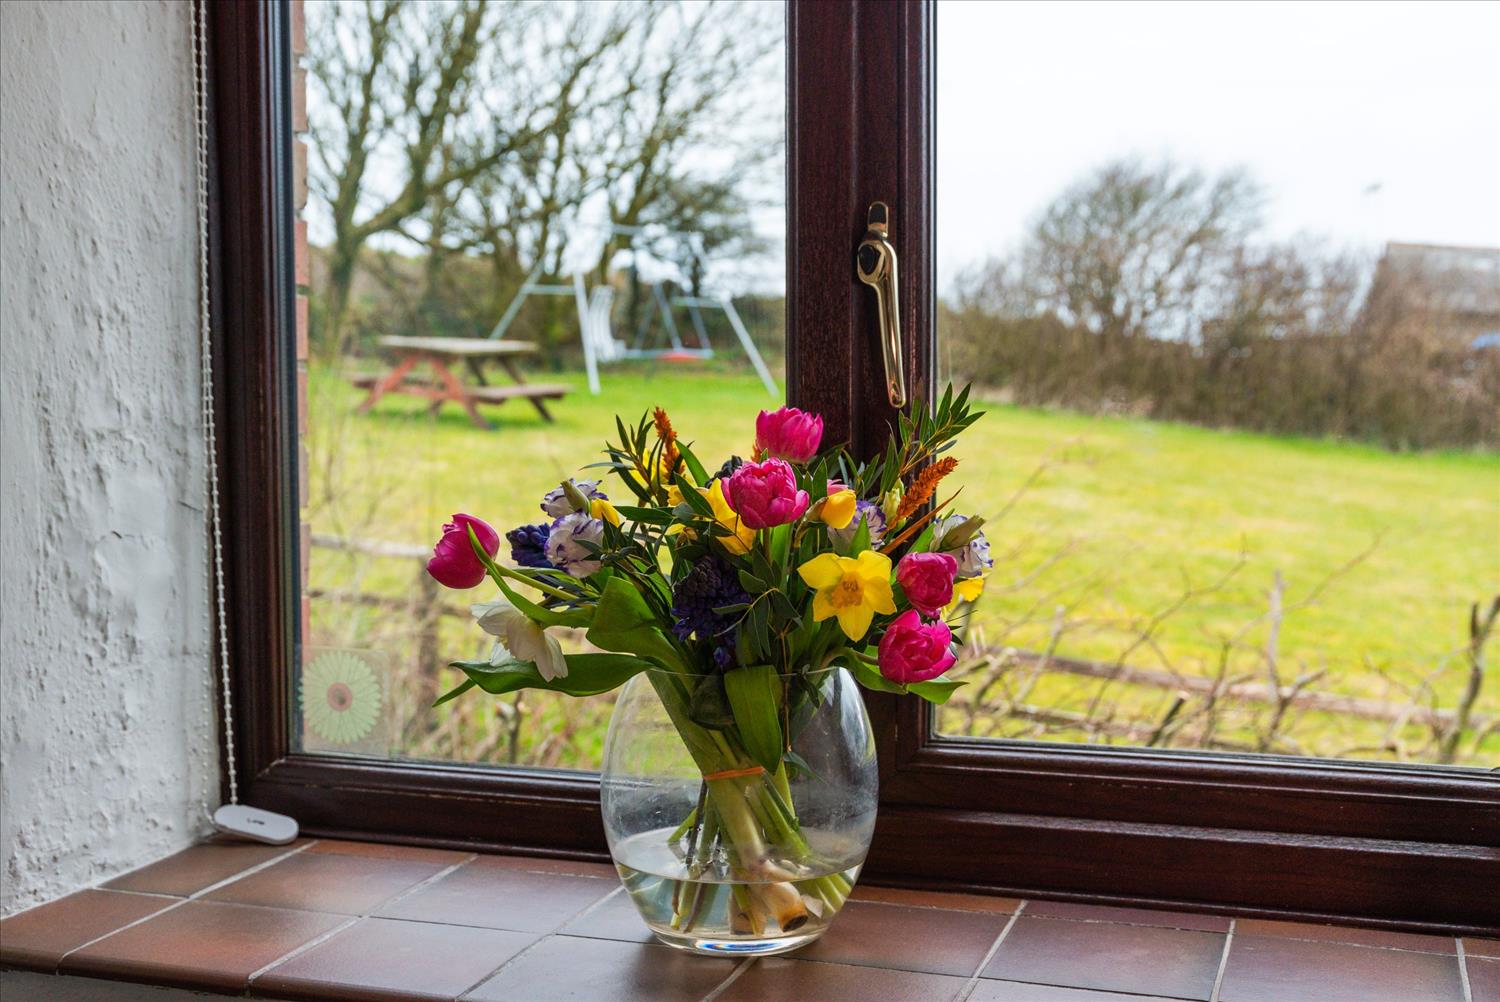 Flowers in the window of the double bedroom at Polrunny Farm's Blackberry Cottage, with the farm's 'Farm Garden' and children's swings visible in the background.